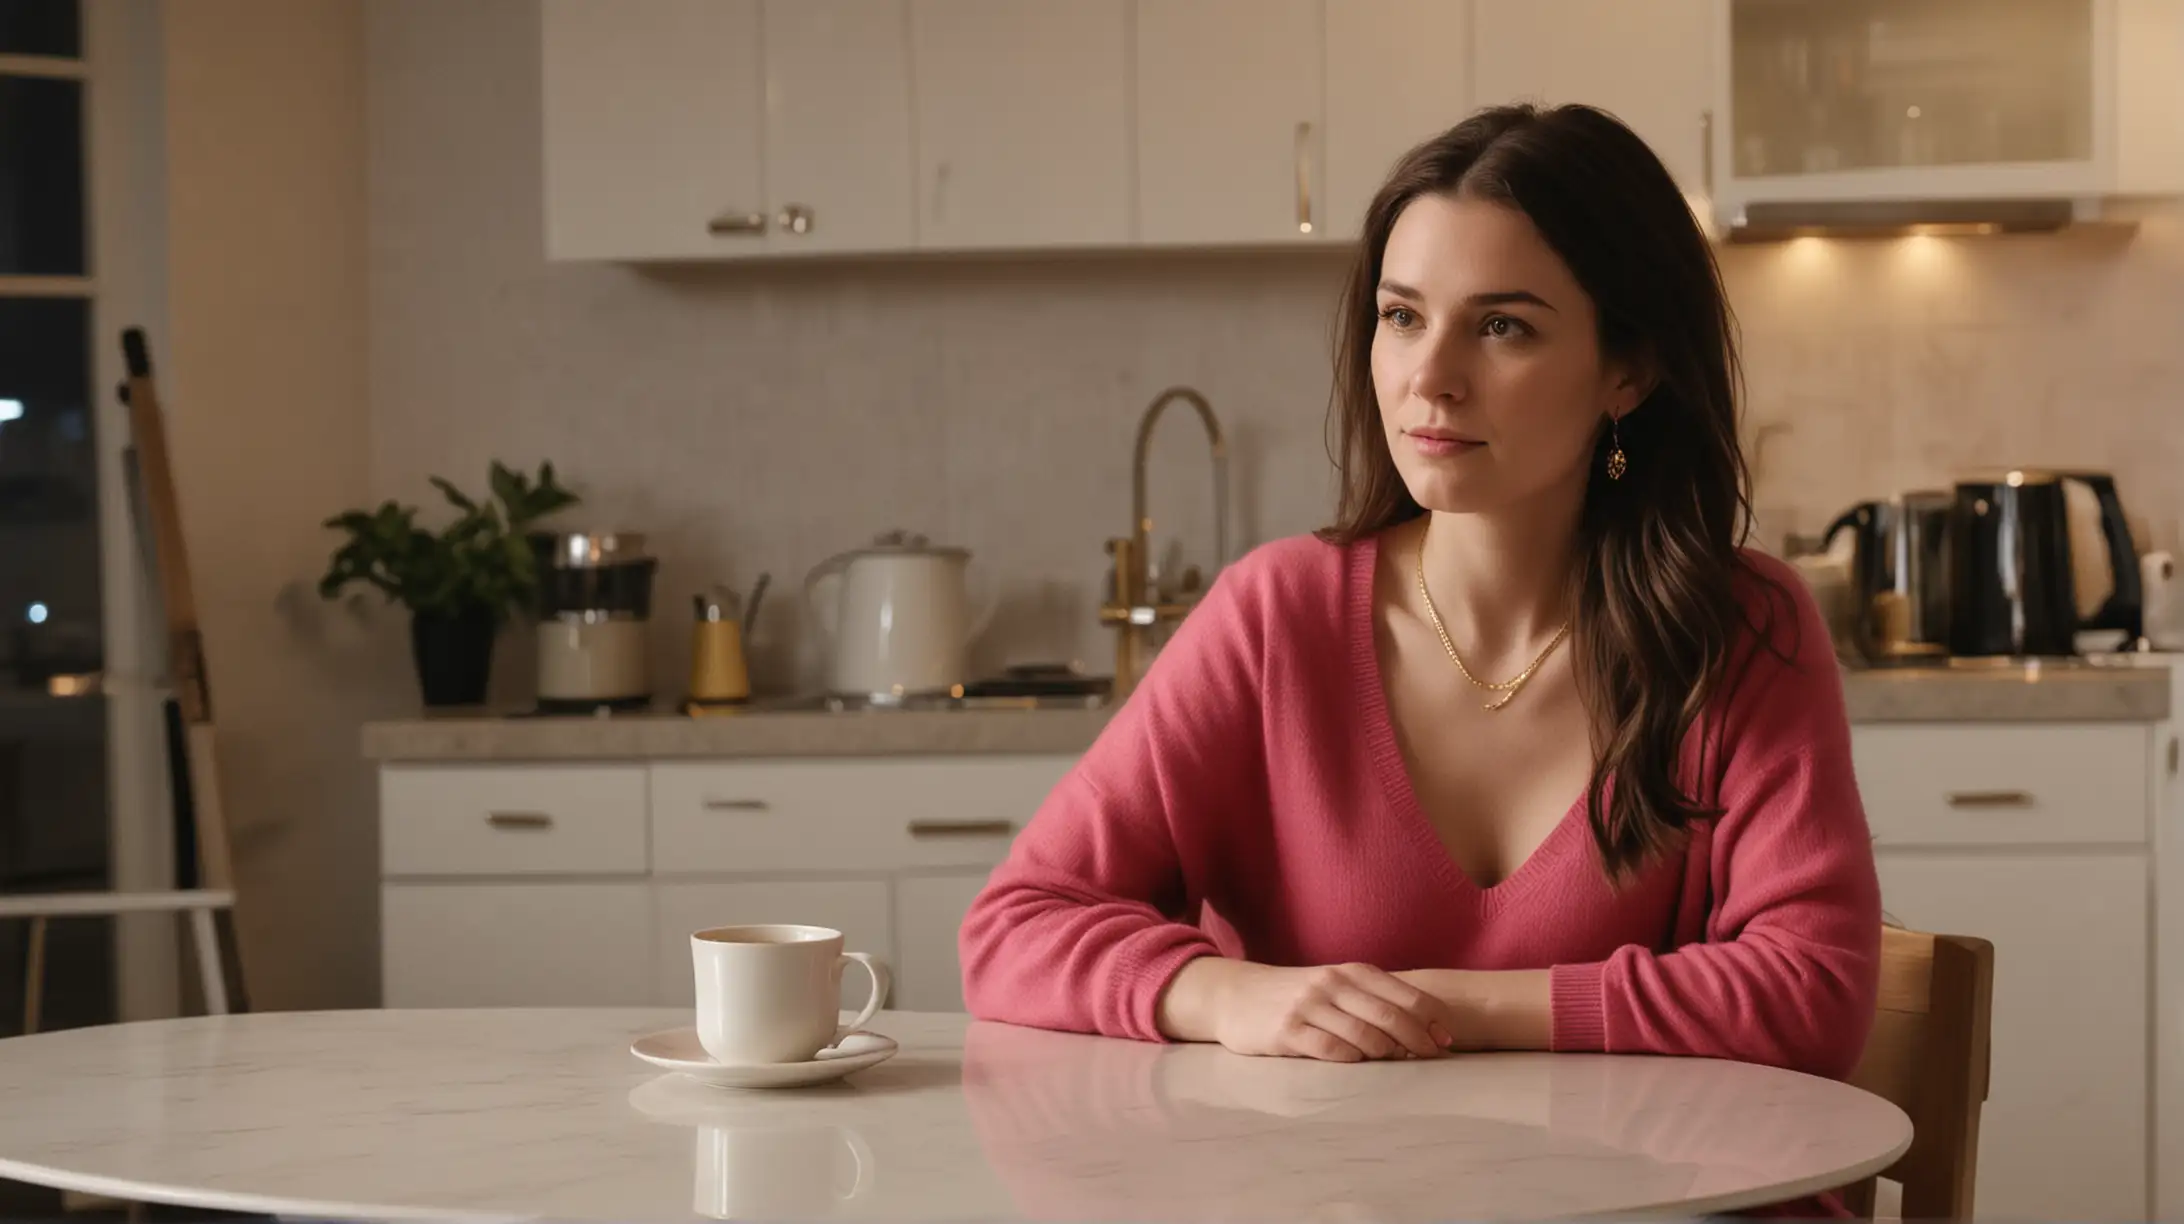 In a modern kitchen at night, 30 year old pale white woman, long dark brown hair parted to the right, pink sweater and a gold necklace, sitting down on chair at kitchen table. The table has exactly one mug of tea, night high rise apartment background.